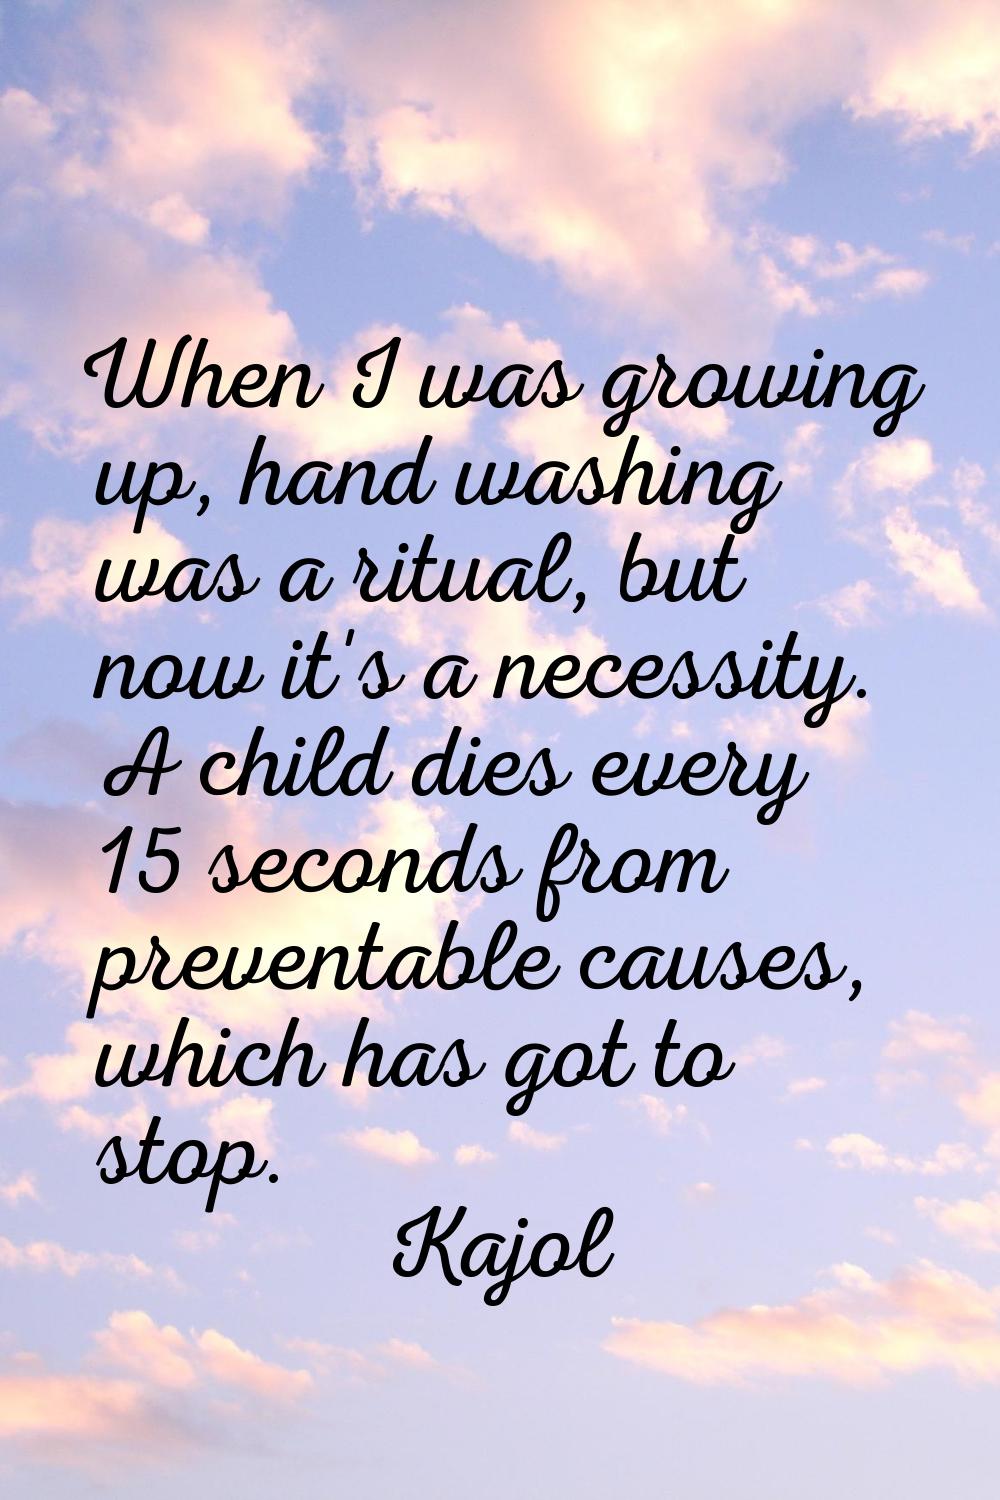 When I was growing up, hand washing was a ritual, but now it's a necessity. A child dies every 15 s